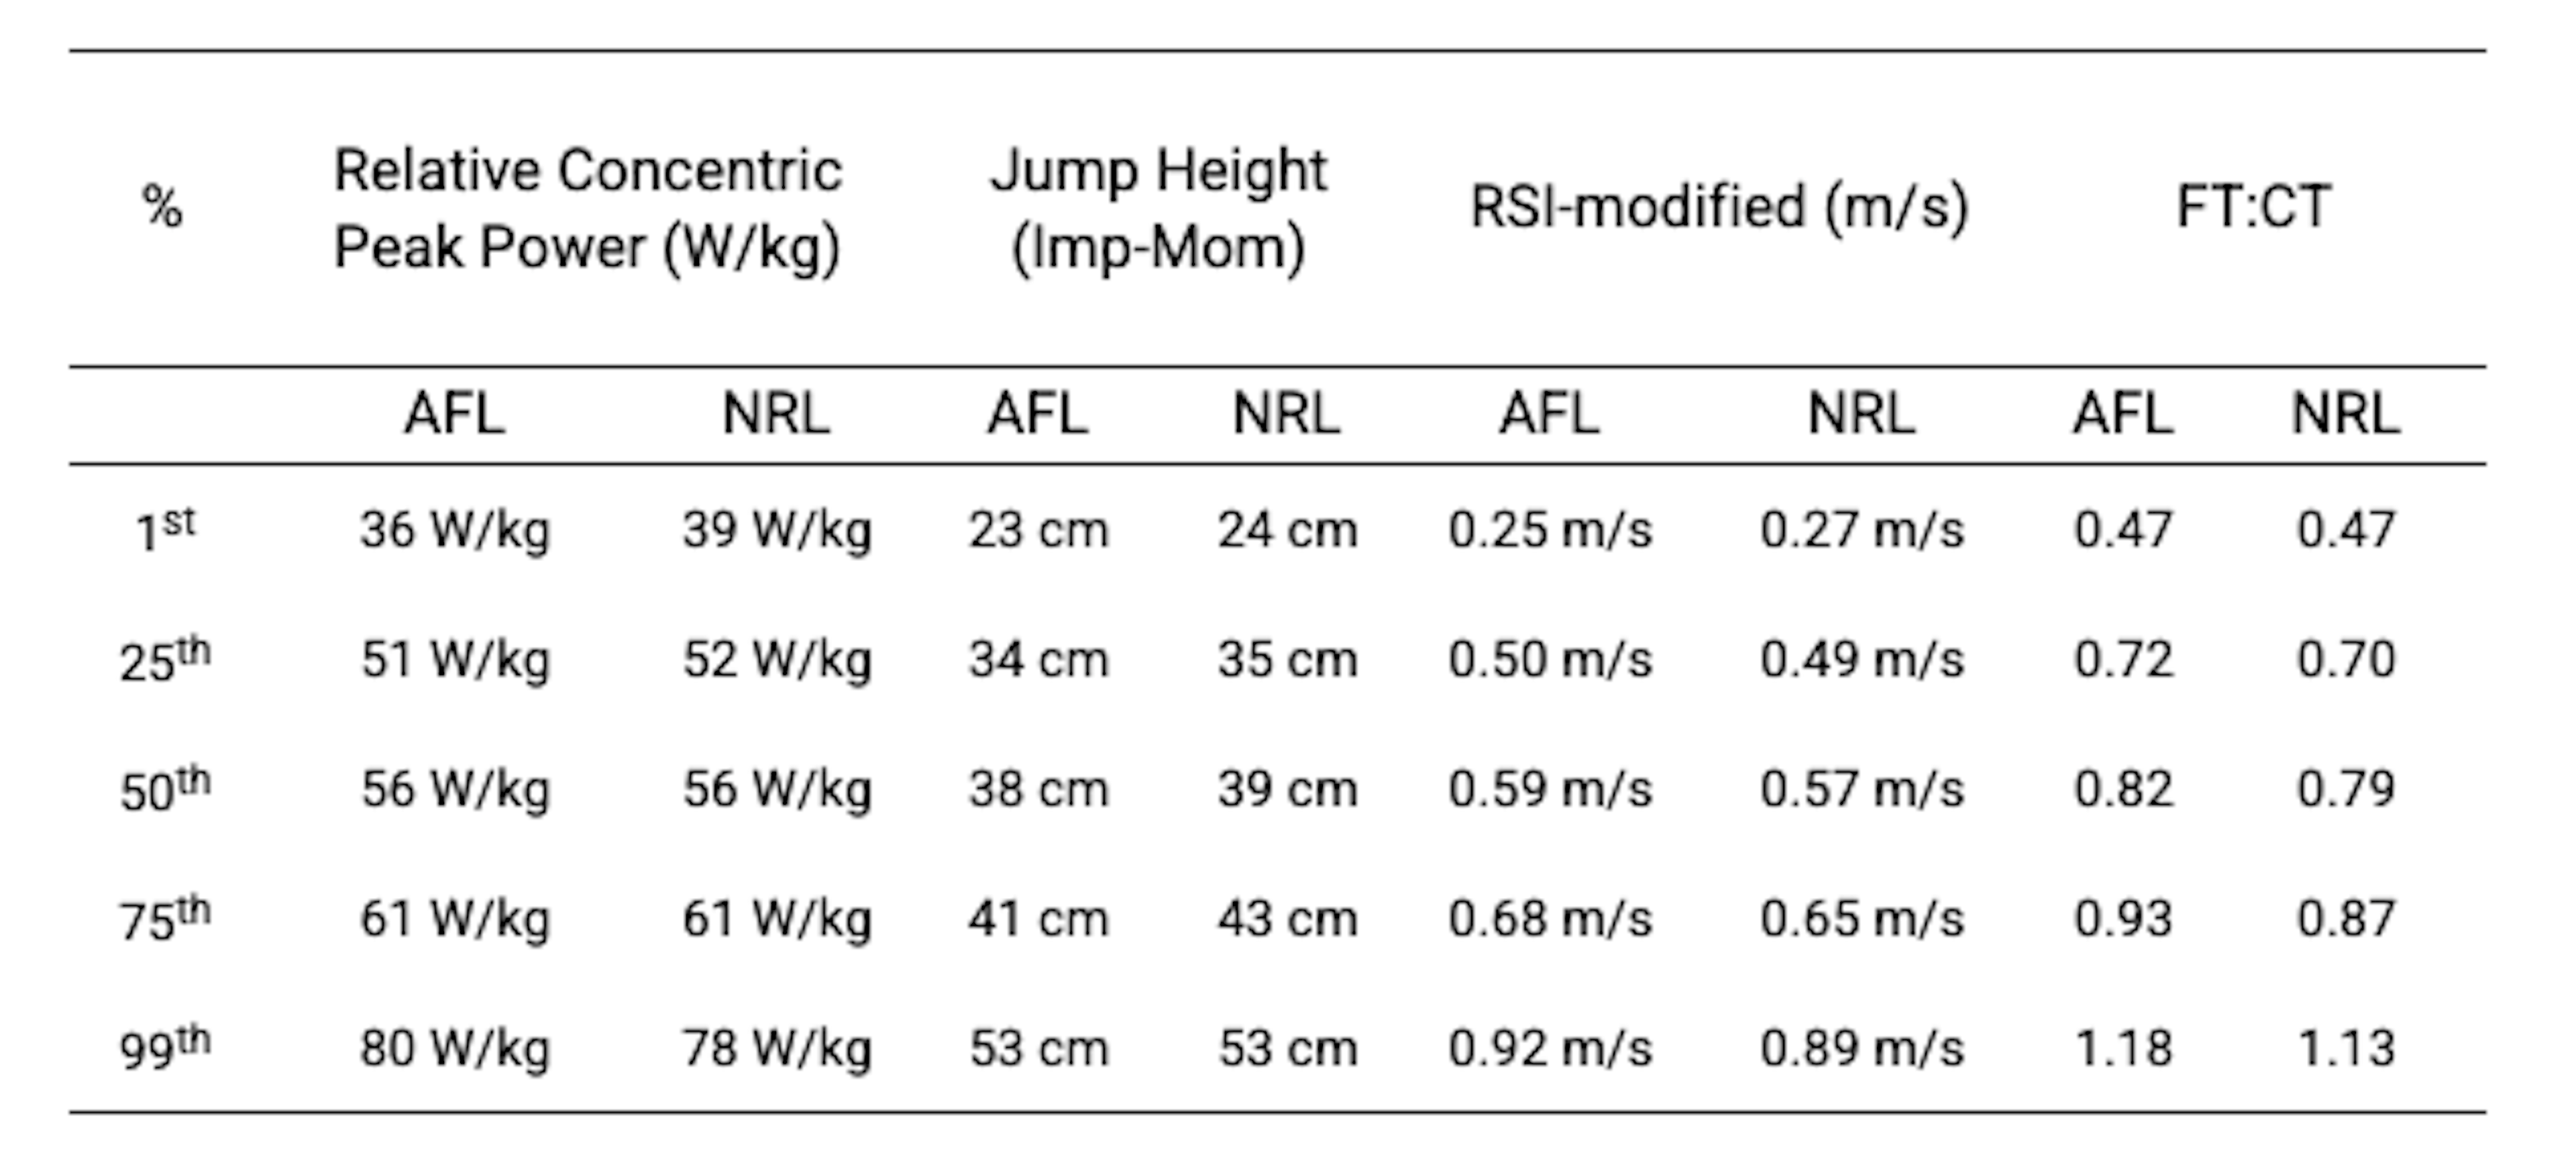 Table 1. Percentiles data on key metrics comparing the two leagues for countermovement jump performance. FT:CT = flight time:contraction time ratio.